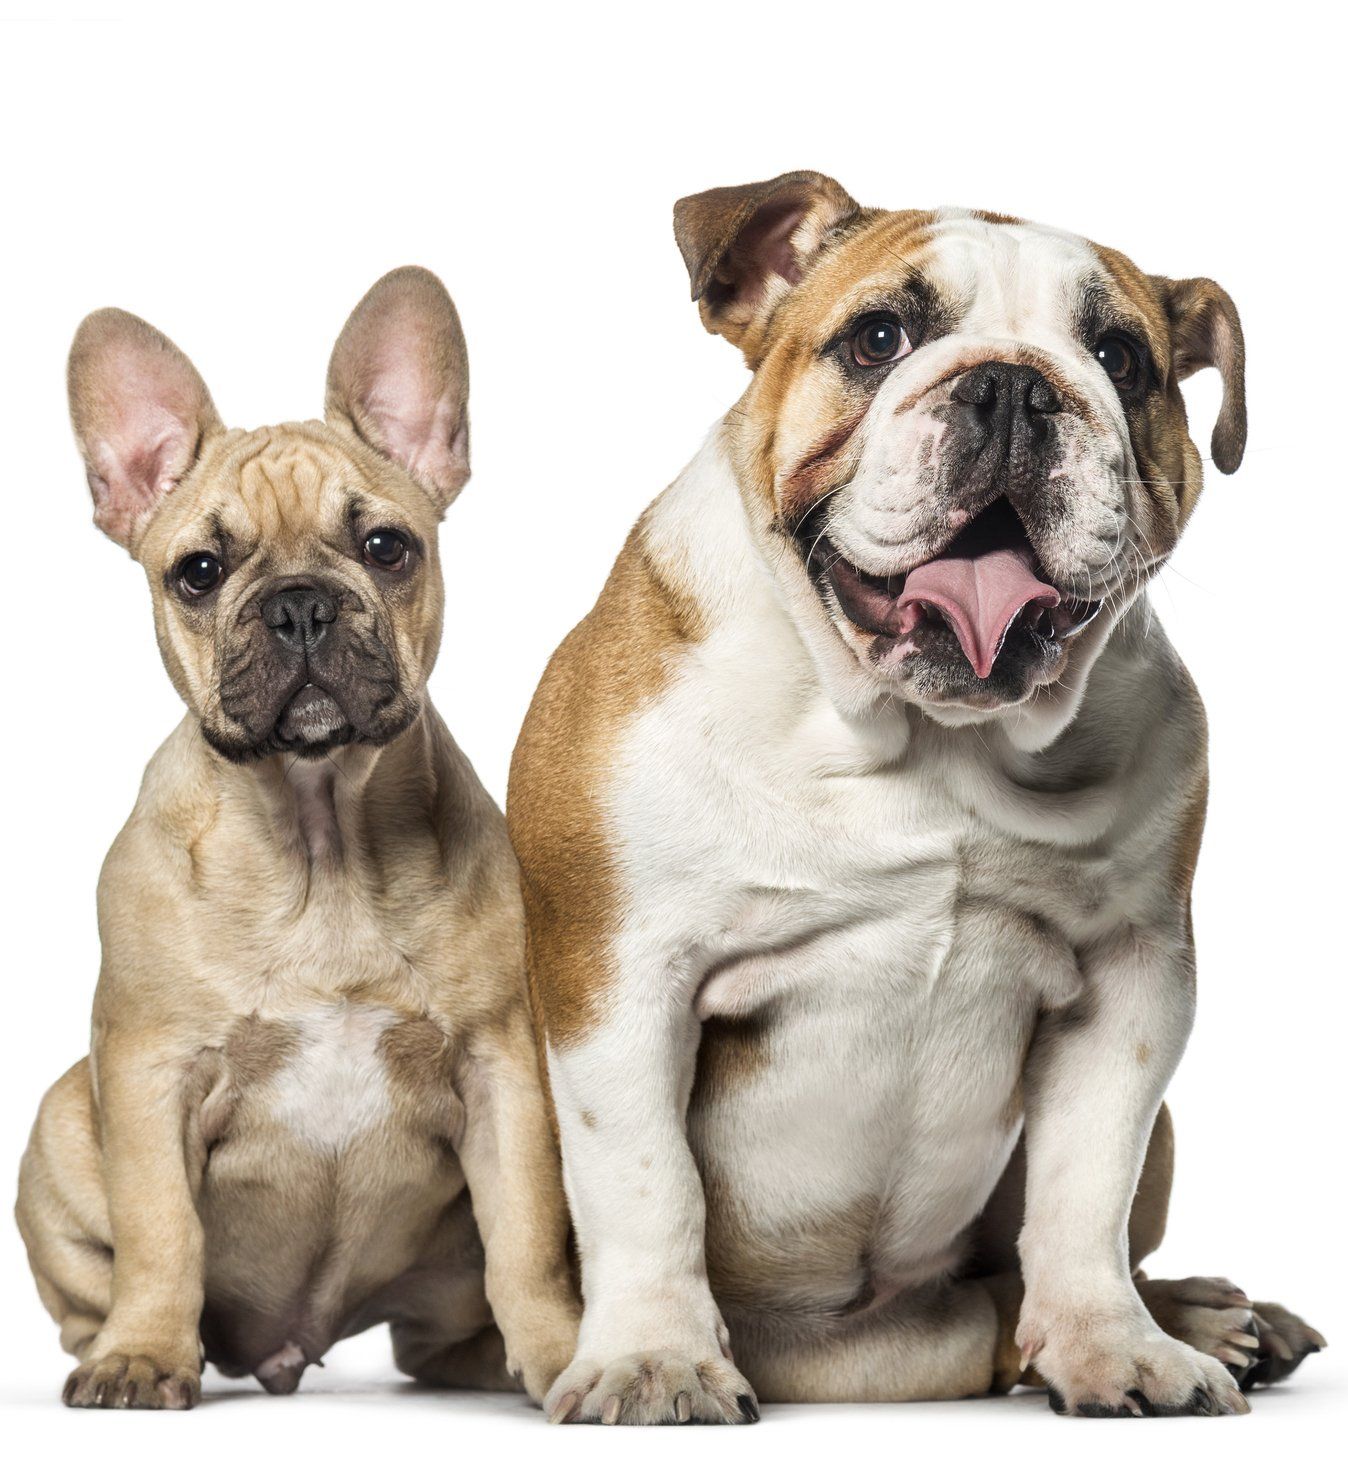 French and English Bulldog | Reno, NV | Statewide Termite and Pest Control Inc